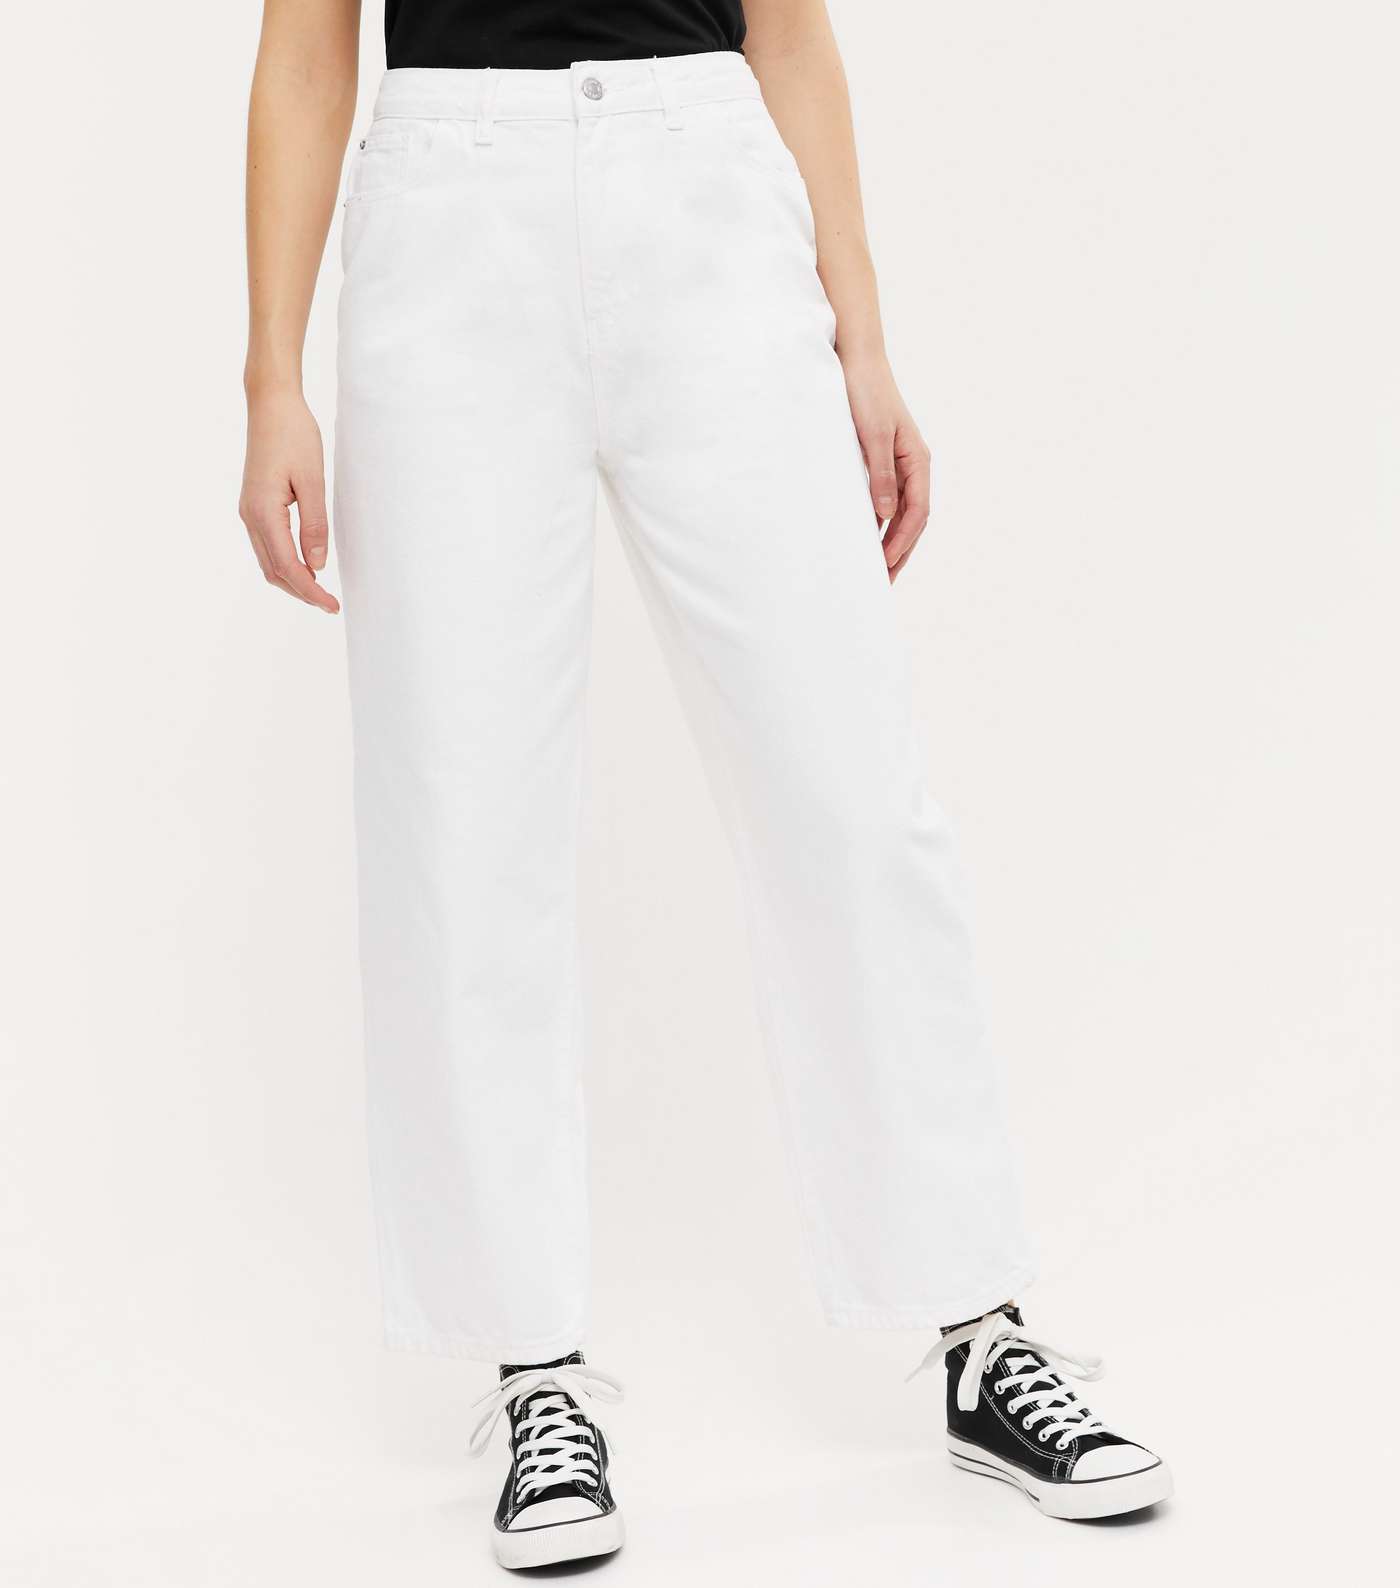 Urban Bliss White 90s Baggy Fit Jeans Image 2